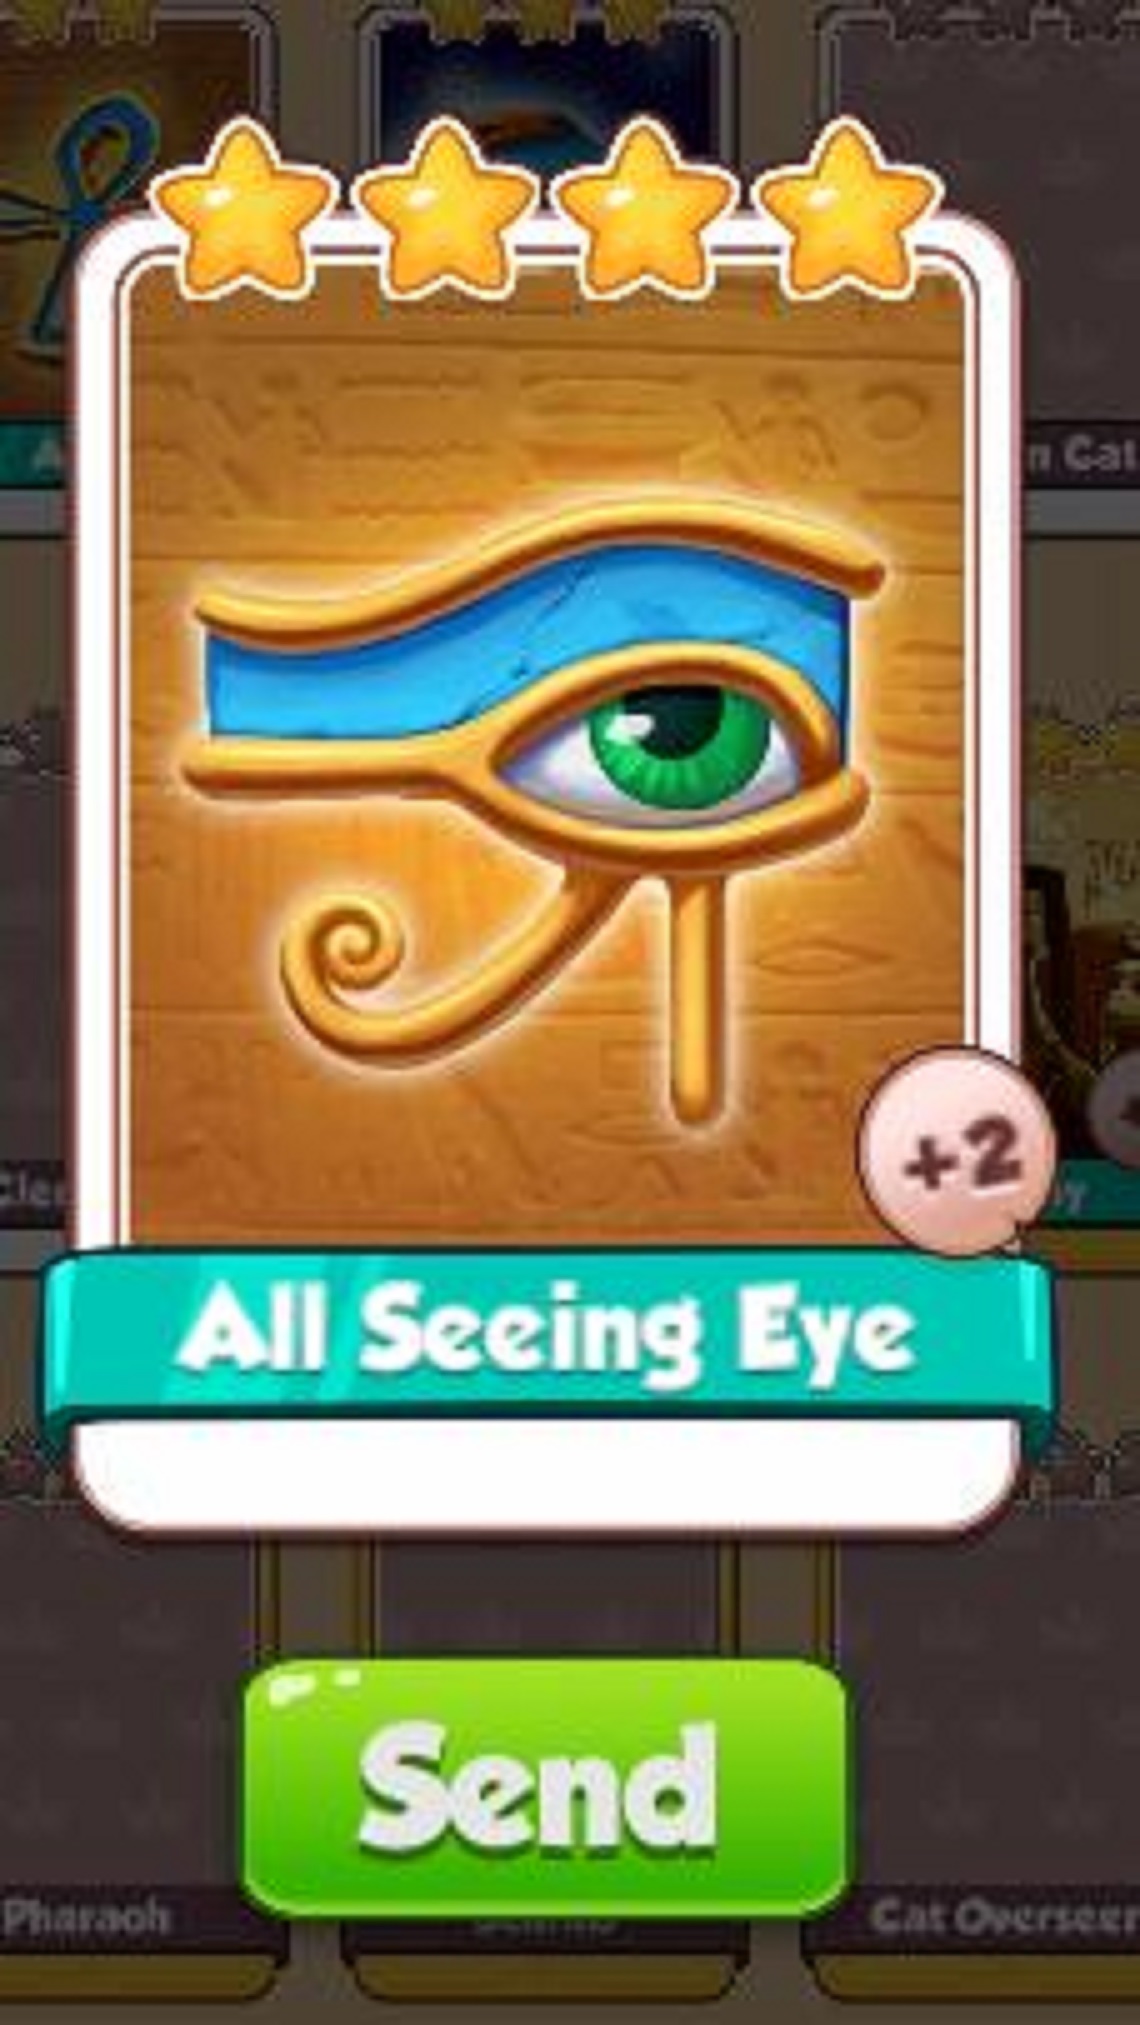 All Seeing Eye Card - Egypt Set - from Coin Master Cards